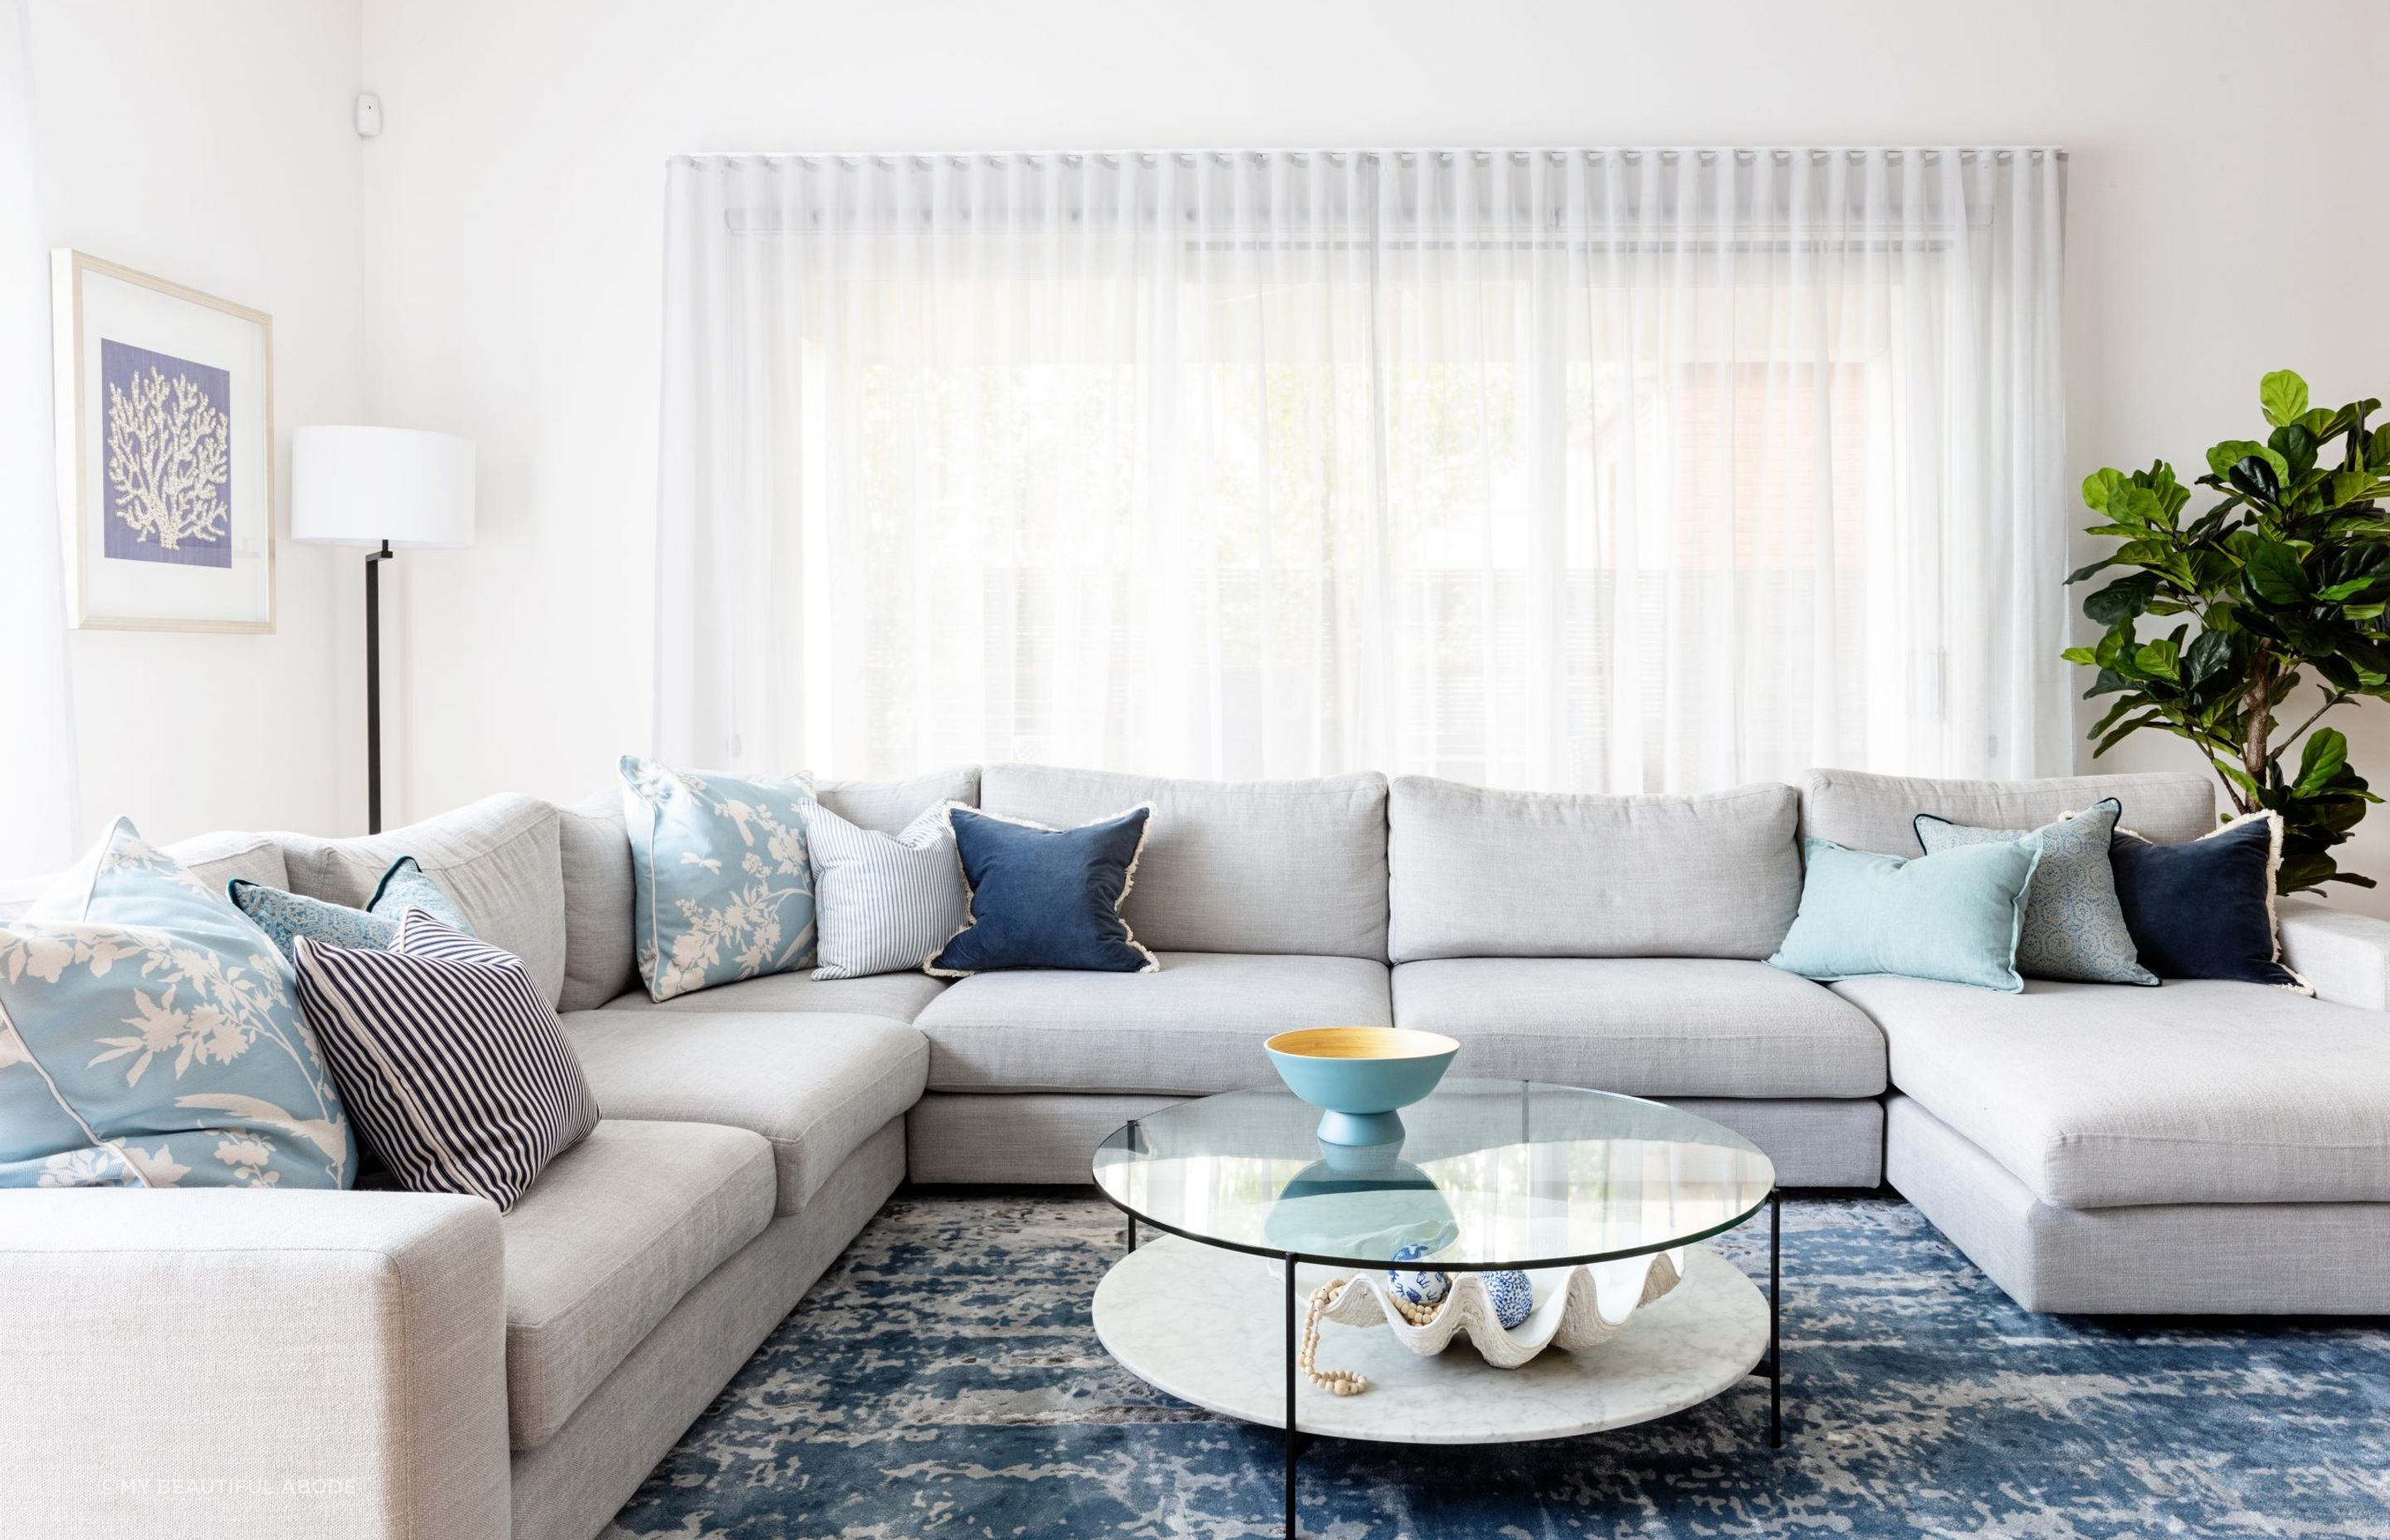 The interior trends of a Hampton style living room encapsulate bright, airy living. Project: Camberwell by My Beautiful Abode. Photography: Lisa Atkinson.